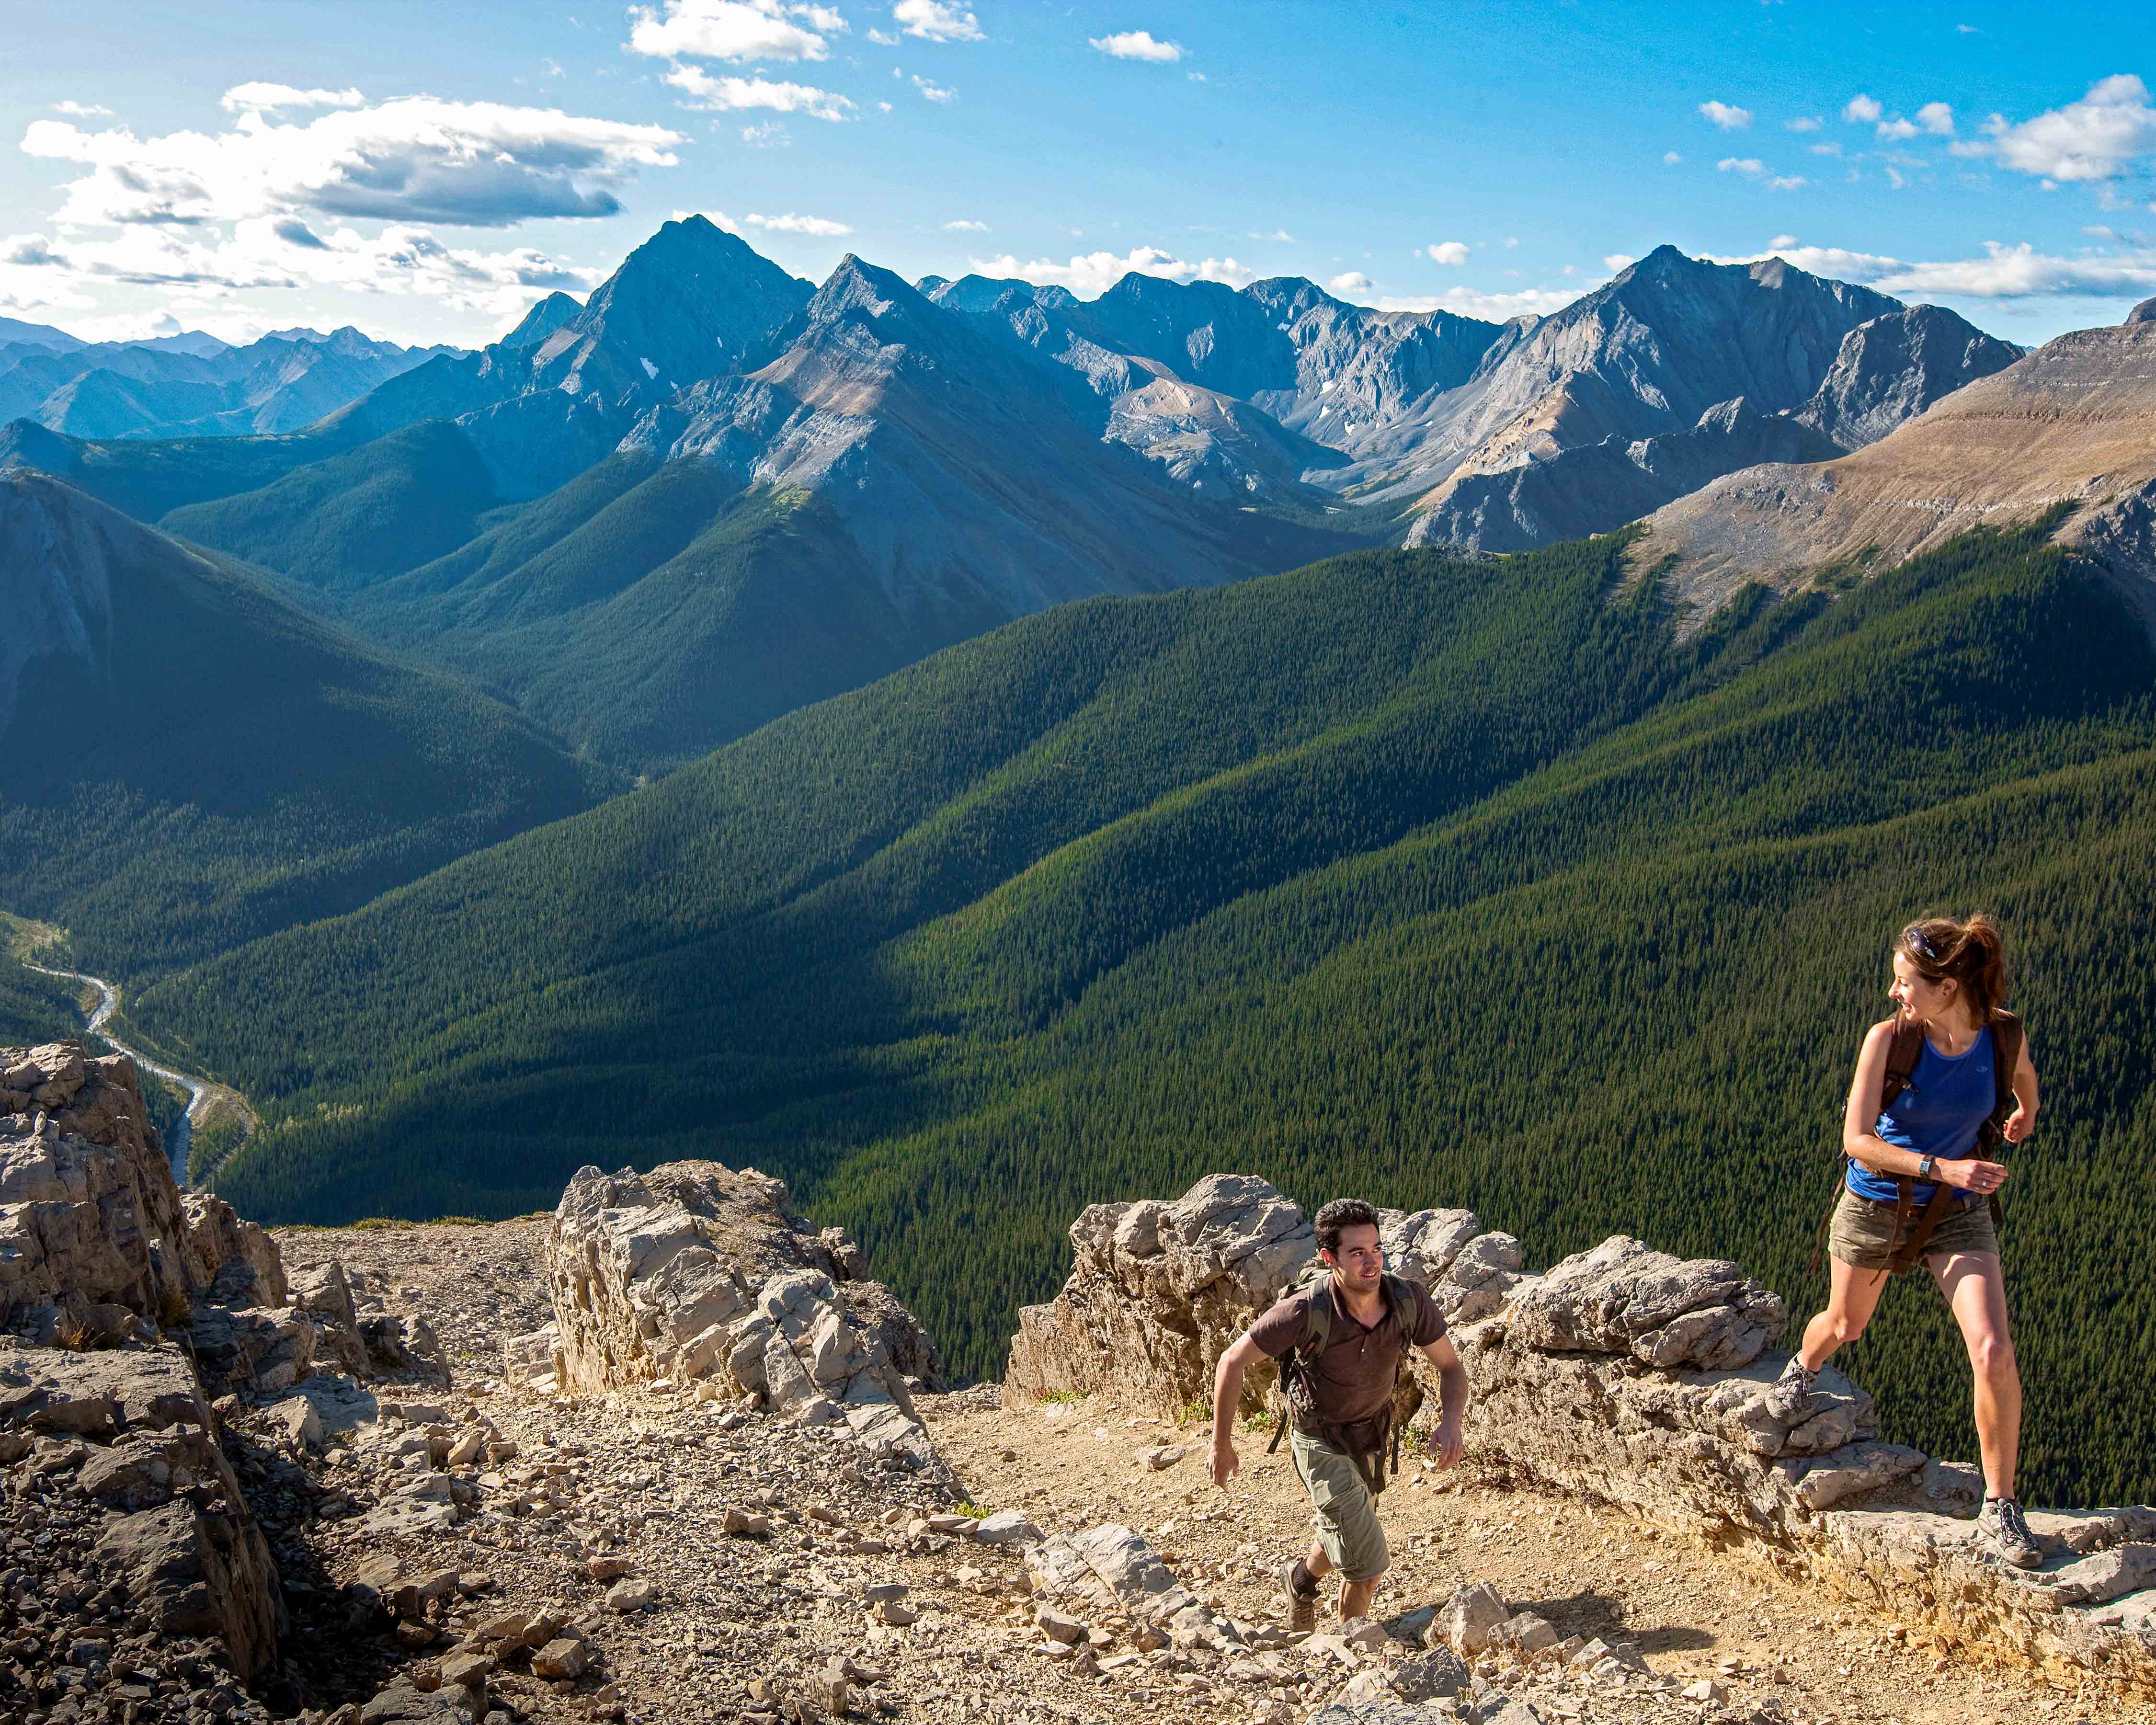 Honeymoon destinations in Canada: young couple running with mountains in background.